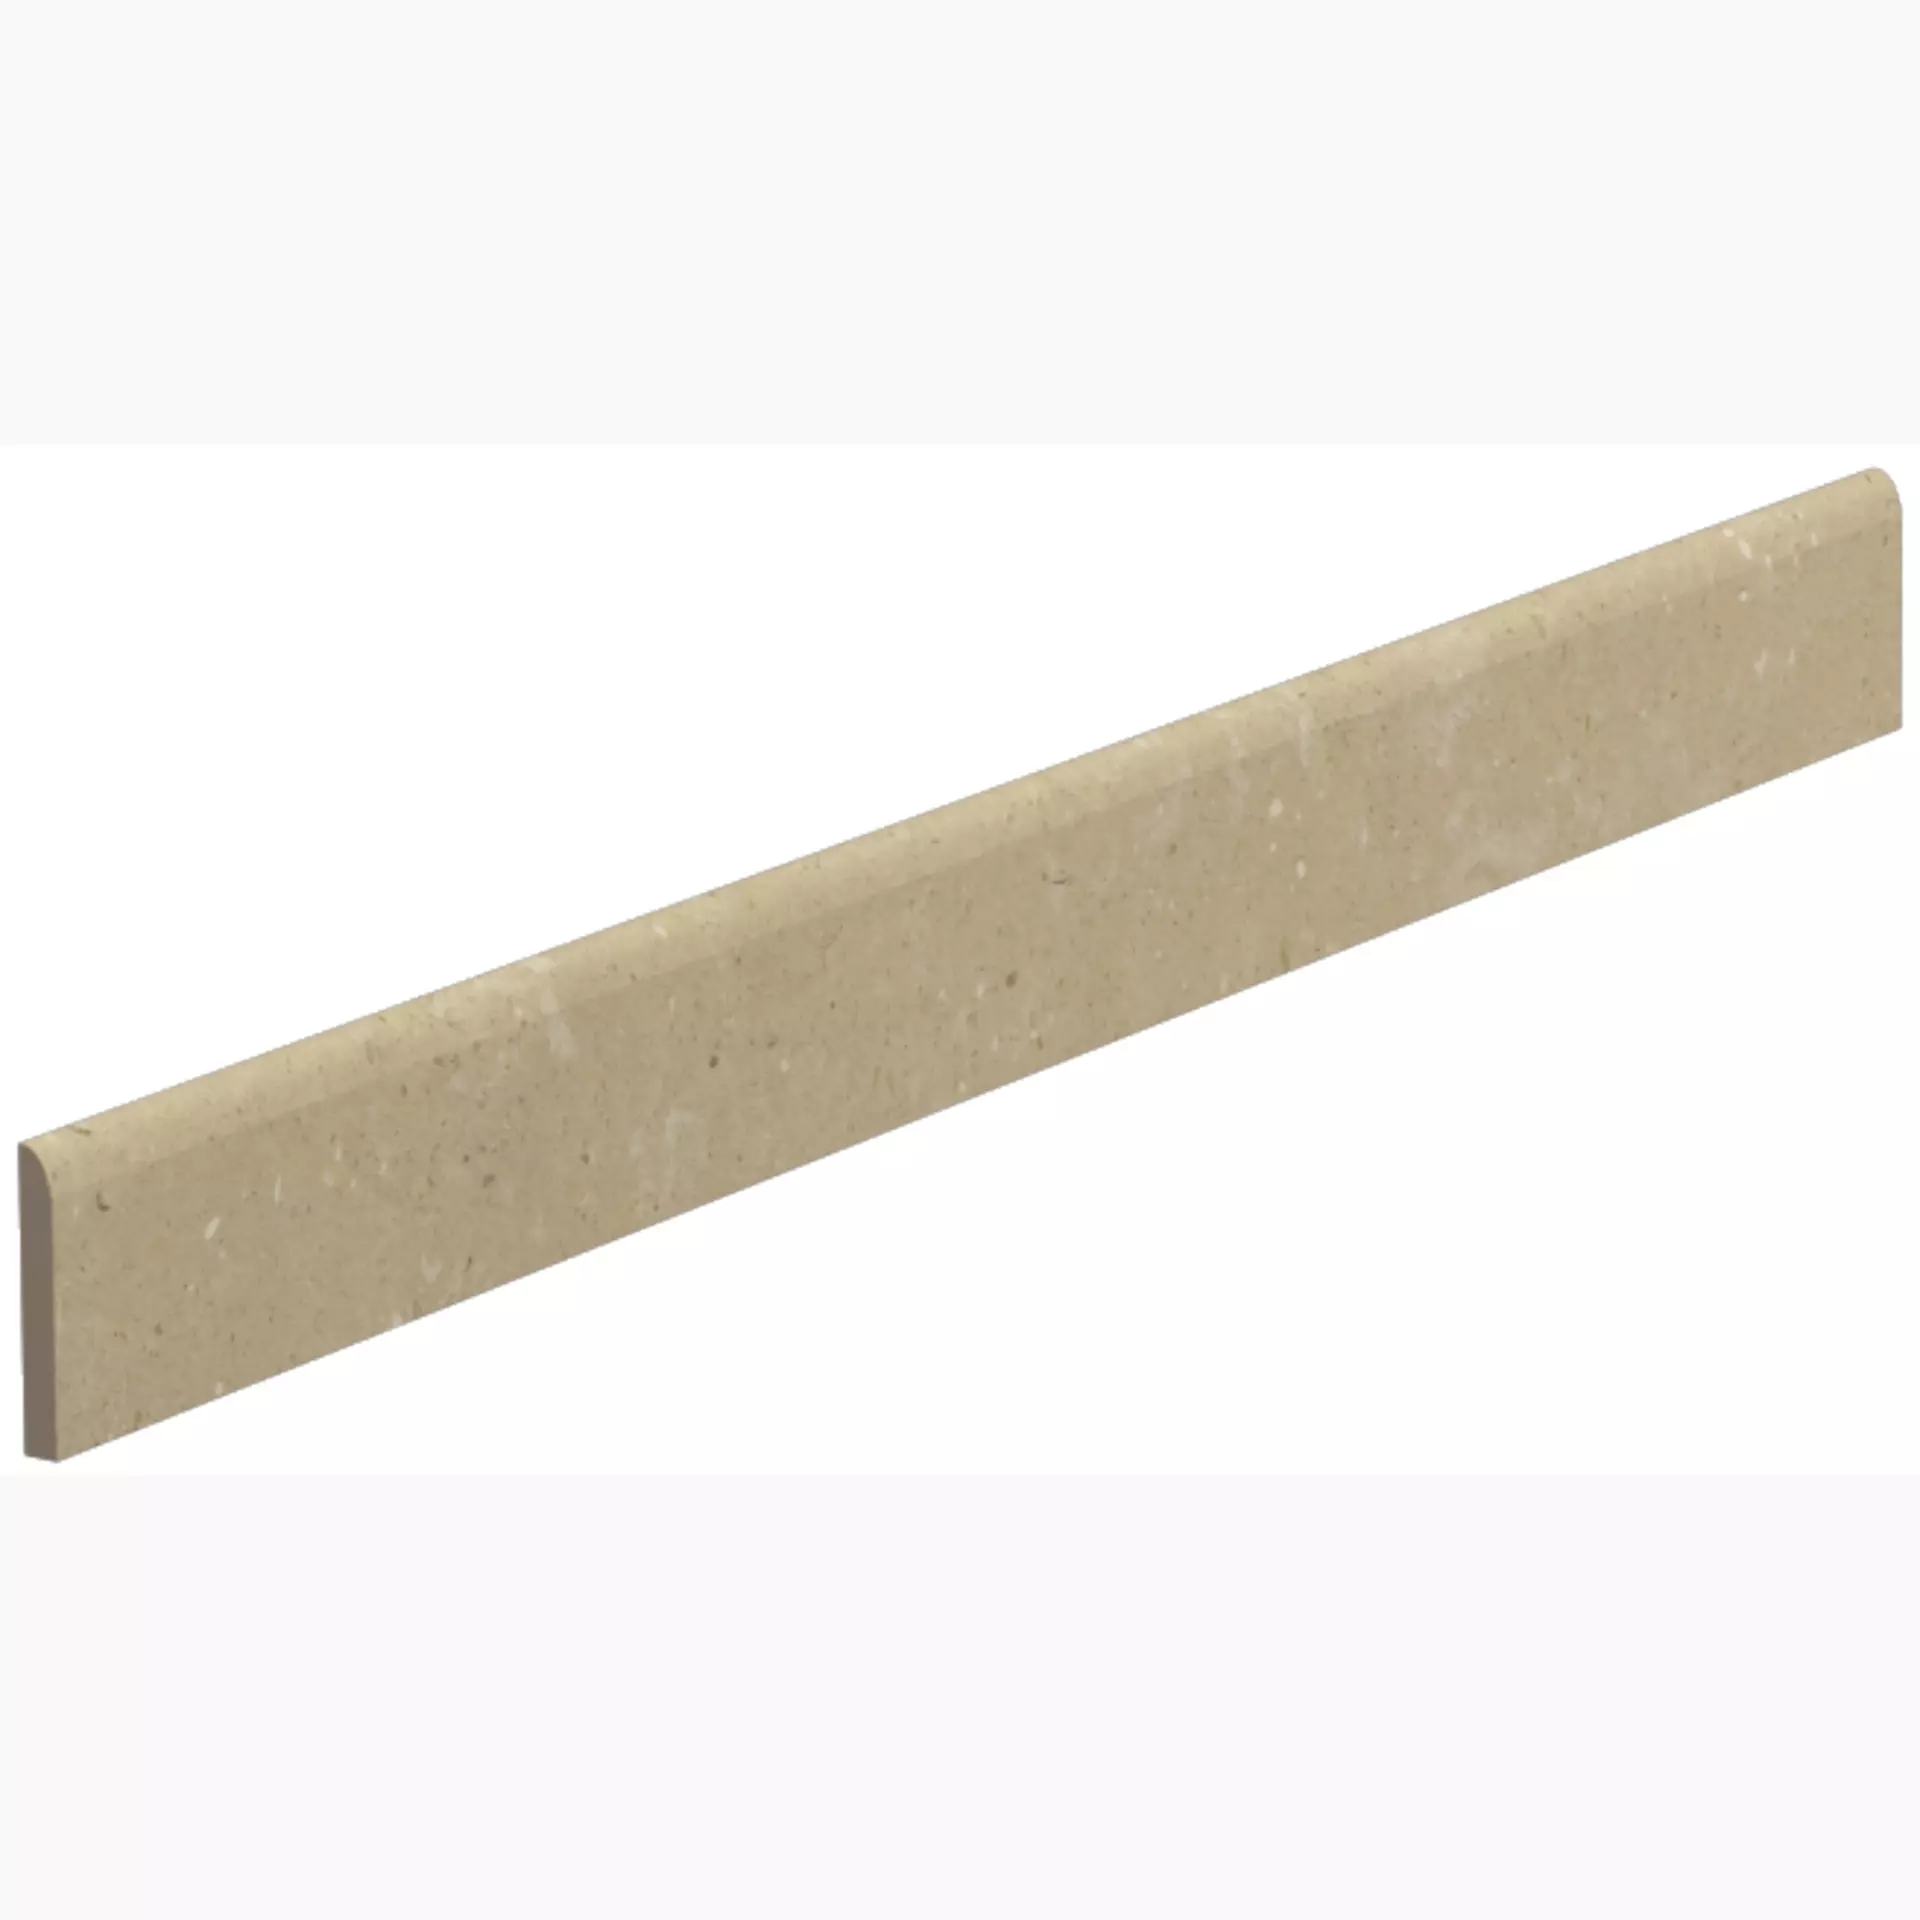 Del Conca Hwd Wild Beige Hwd01 Naturale Skirting board G0WD01R80 7x80cm rectified 8,5mm